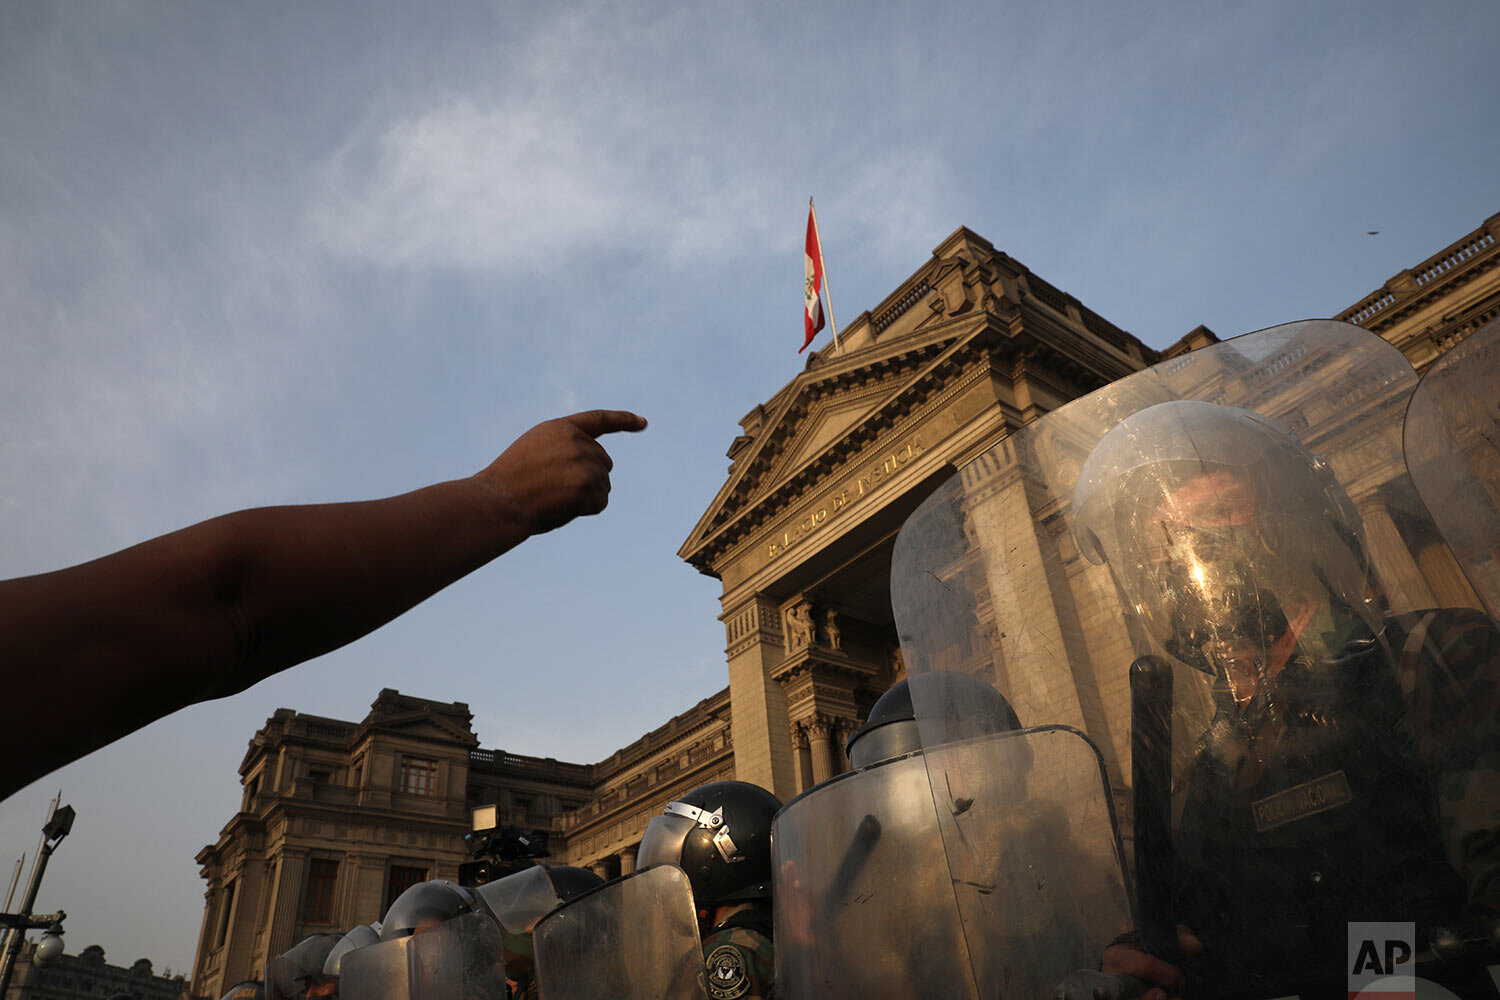  Police form a cordon in front of the Justice Palace as people who are refusing to recognize the new government arrive, in Lima, Peru, Wednesday, Nov. 11, 2020.  (AP Photo/Rodrigo Abd) 